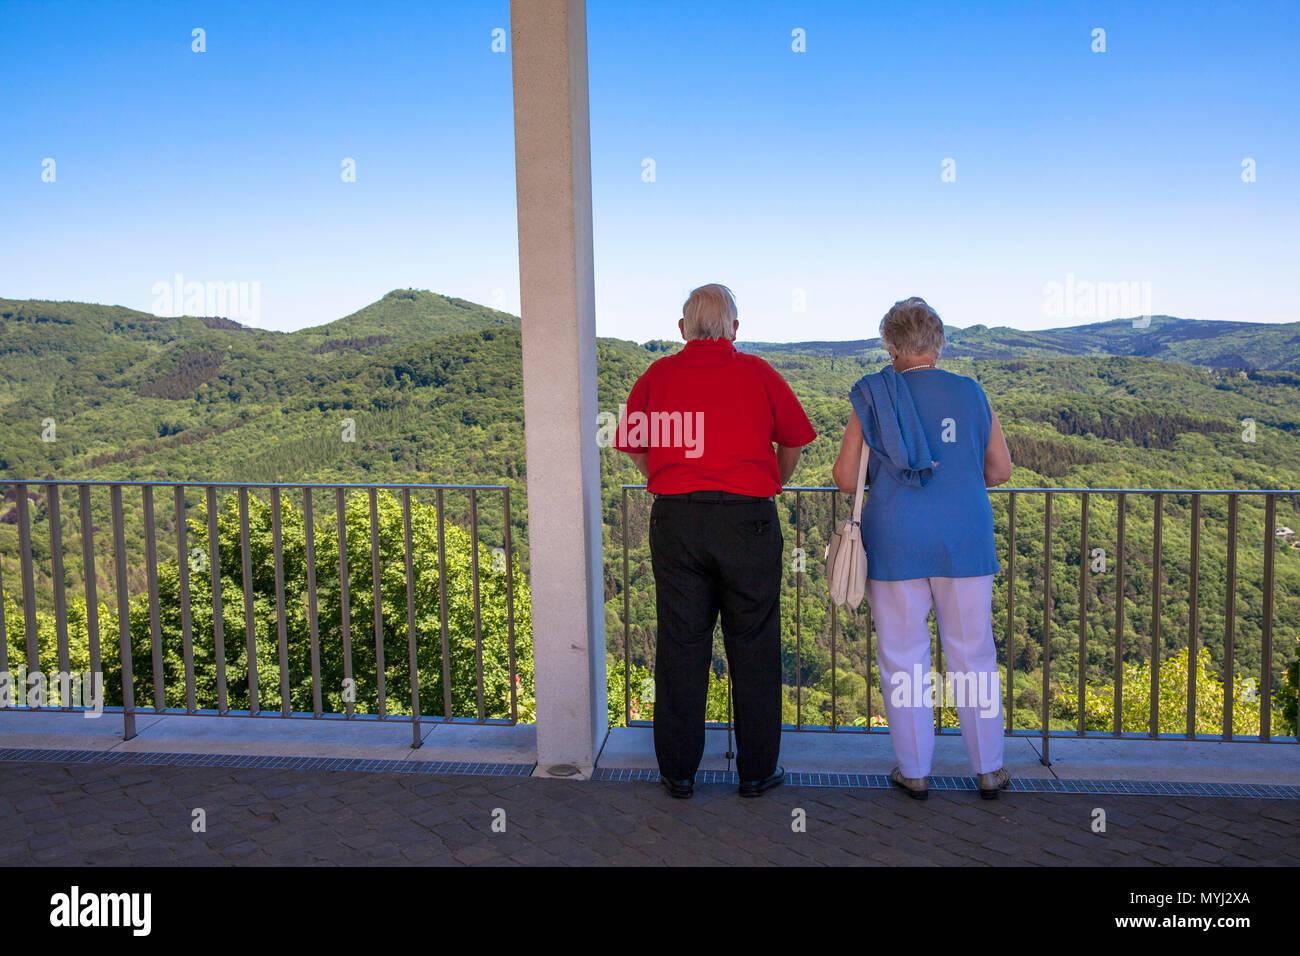 Germany, Siebengebirge, visitors on the terrace of the Drachenfels mountain looking to the arboreous hills of the natural park Siebengebirge near Koen Stock Photo